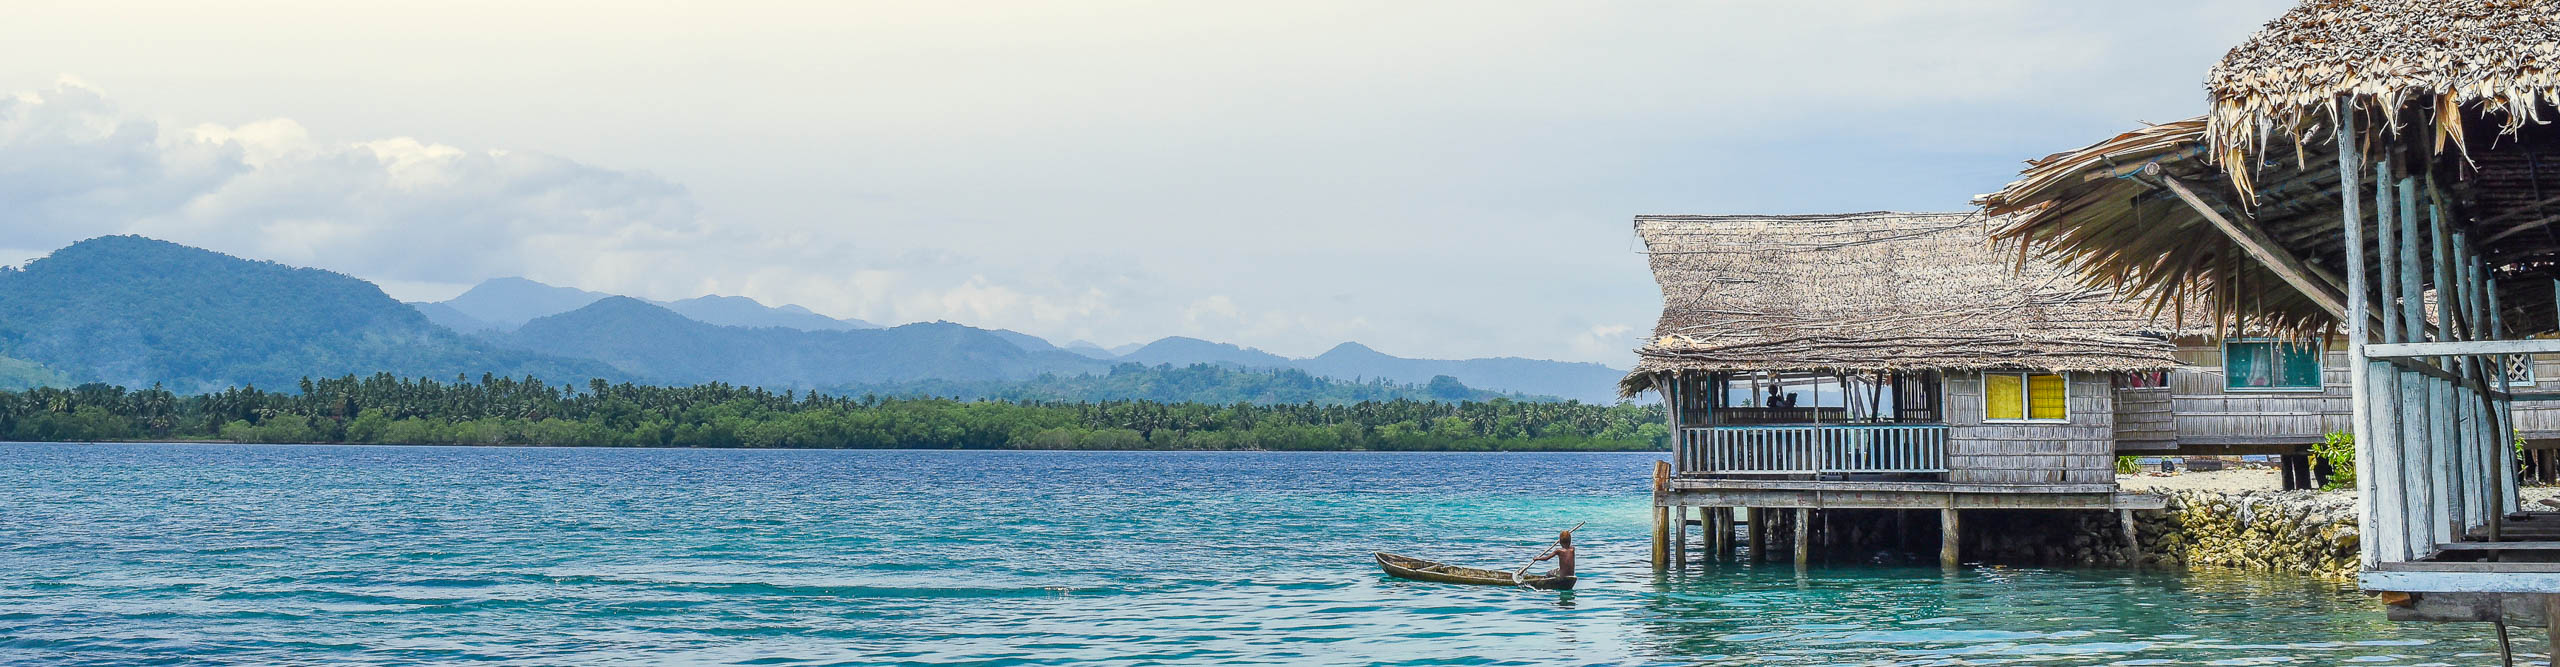 Fisherman on boat next to hi stilt house on the water in the Solomon Islands